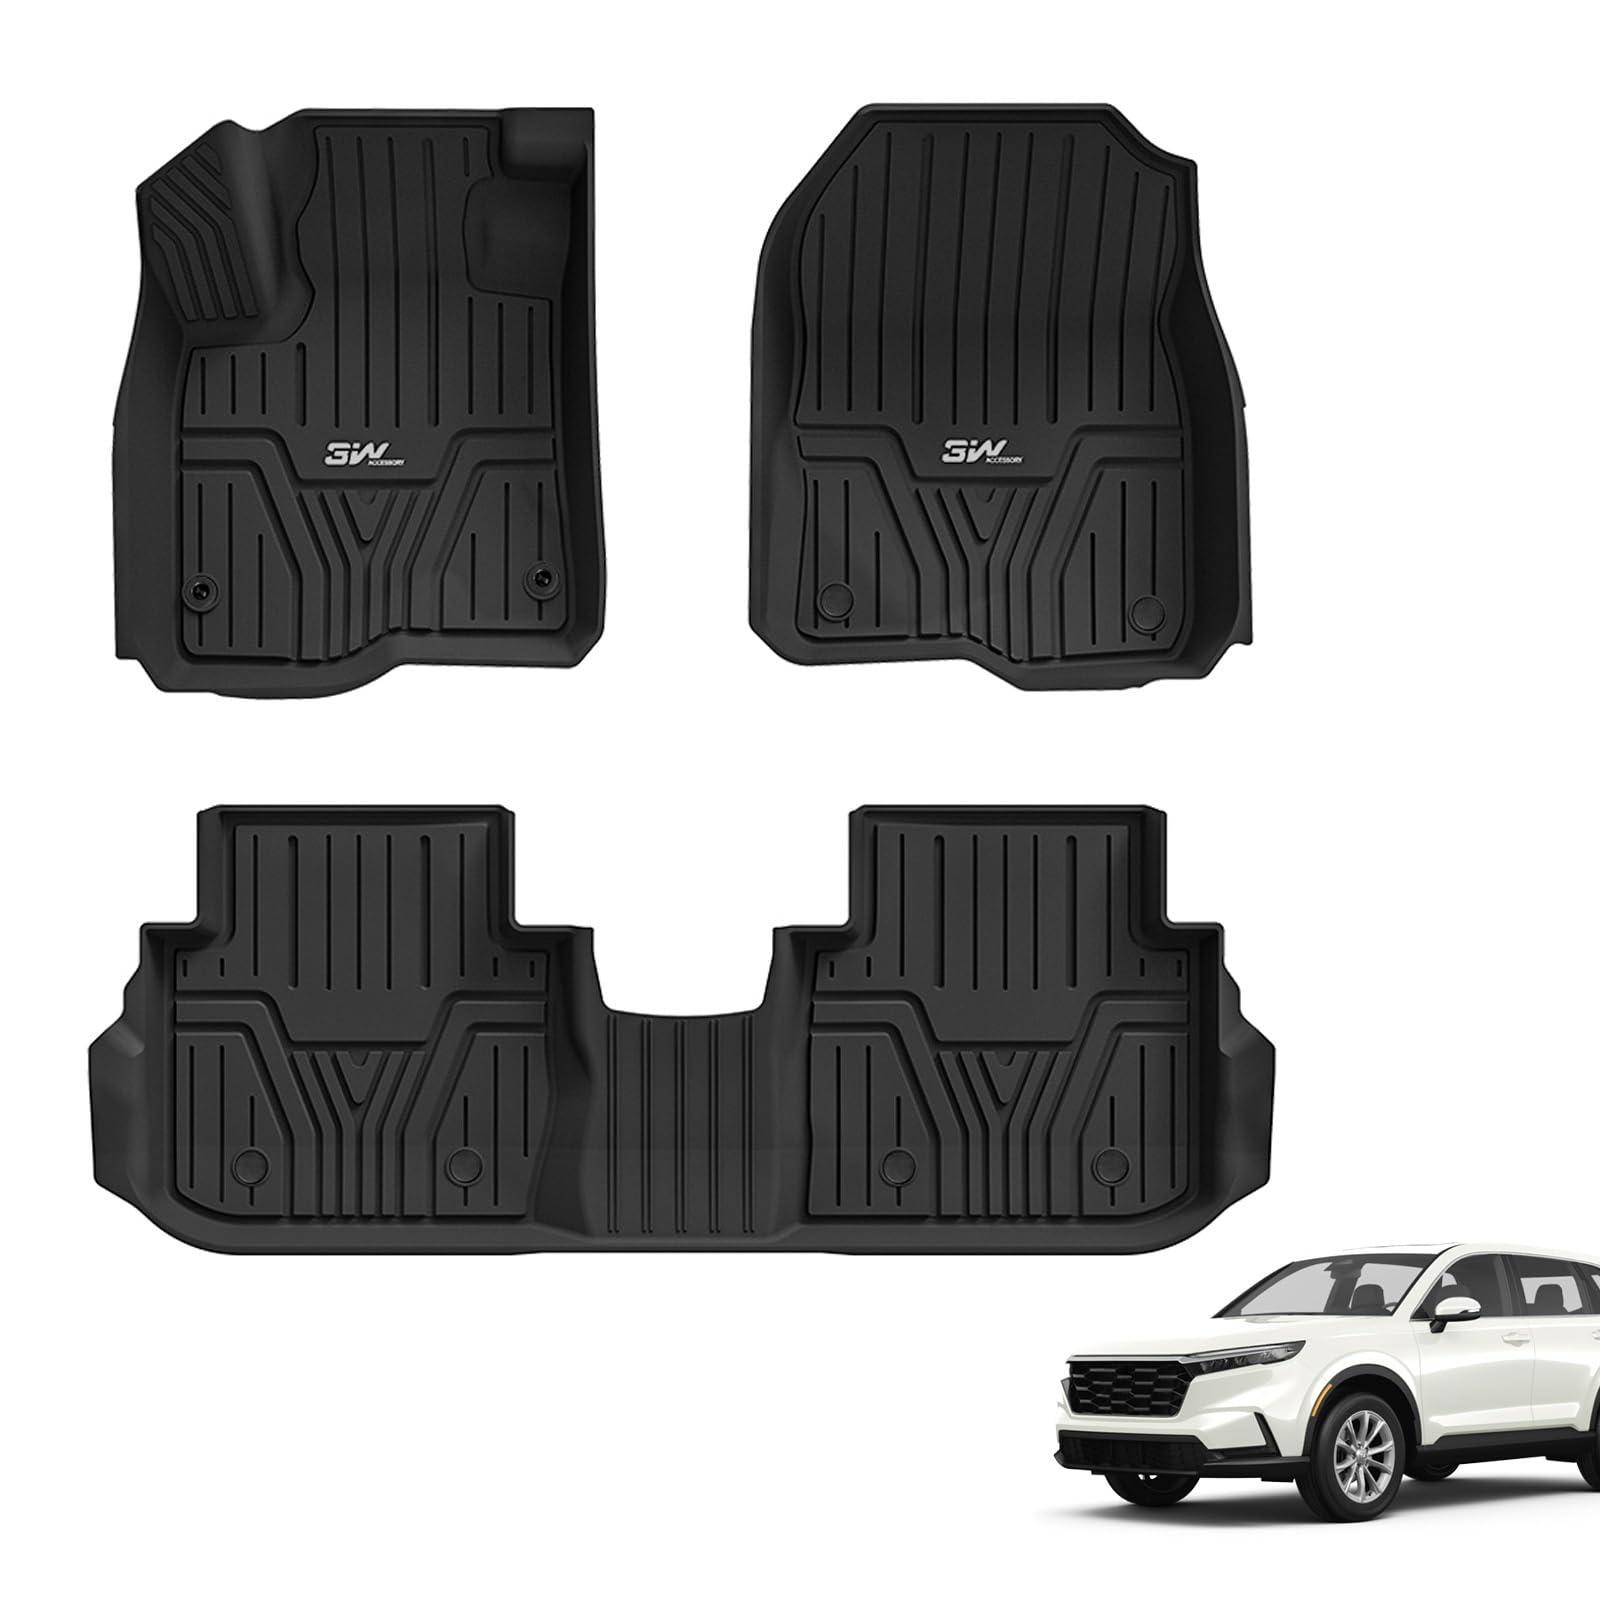 3W Honda CR-V 2023-2025 Custom Floor Mats(Include Hybrid) / Trunk Mat(Non Hybrid) CRV TPE Material & All-Weather Protection Vehicles & Parts 3Wliners 2023-2025 CR-V 2023-2025 1st&2nd Row Mats